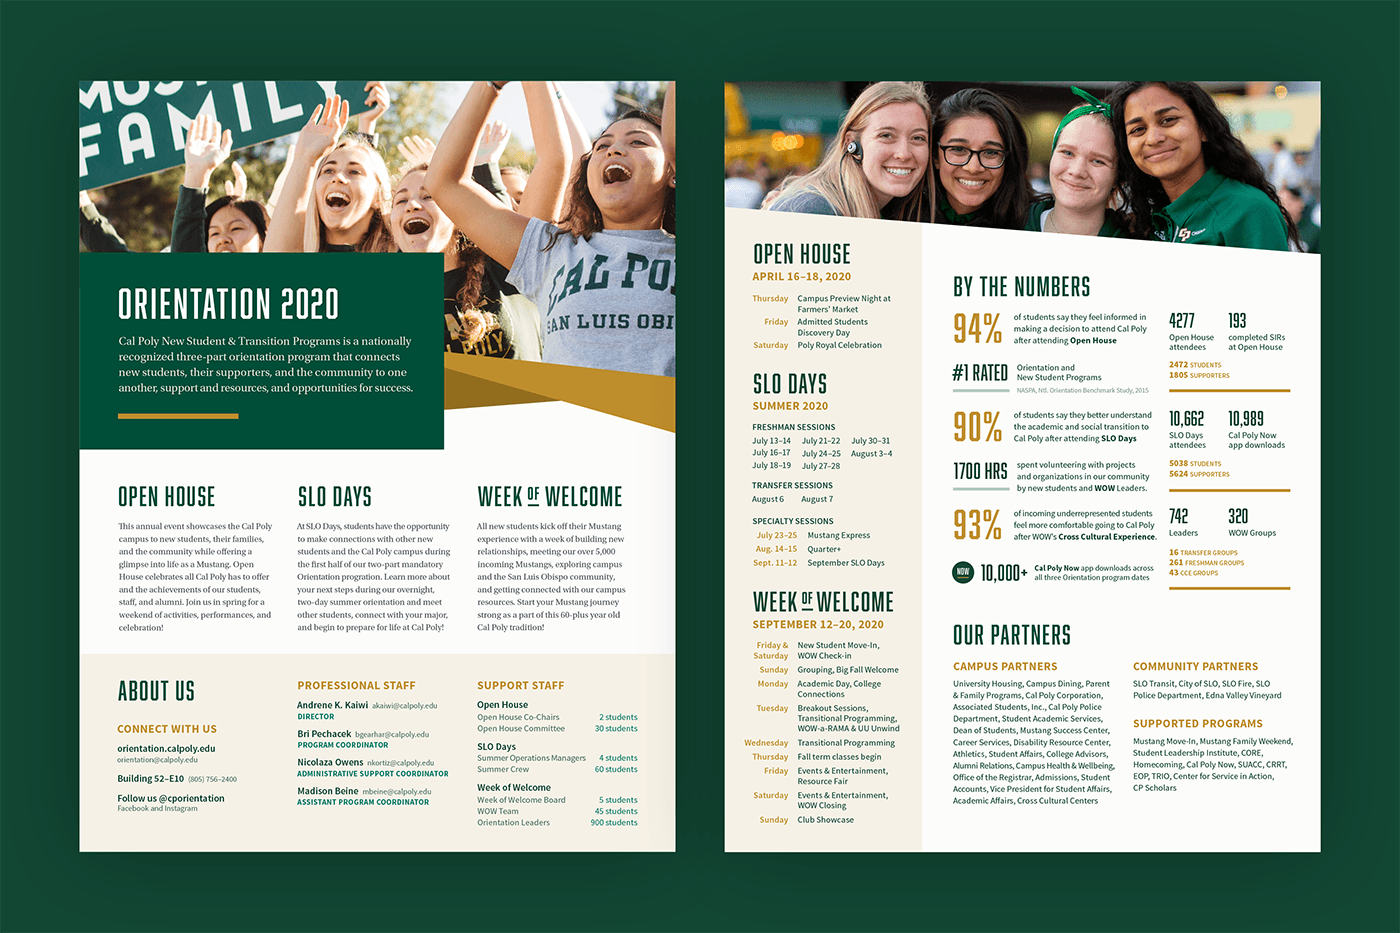 The Orientation One Sheet document set against a light tan background. The document is a printed one-pager that features overviews of the programs offered, staff contact information, and statistics about program outcomes.